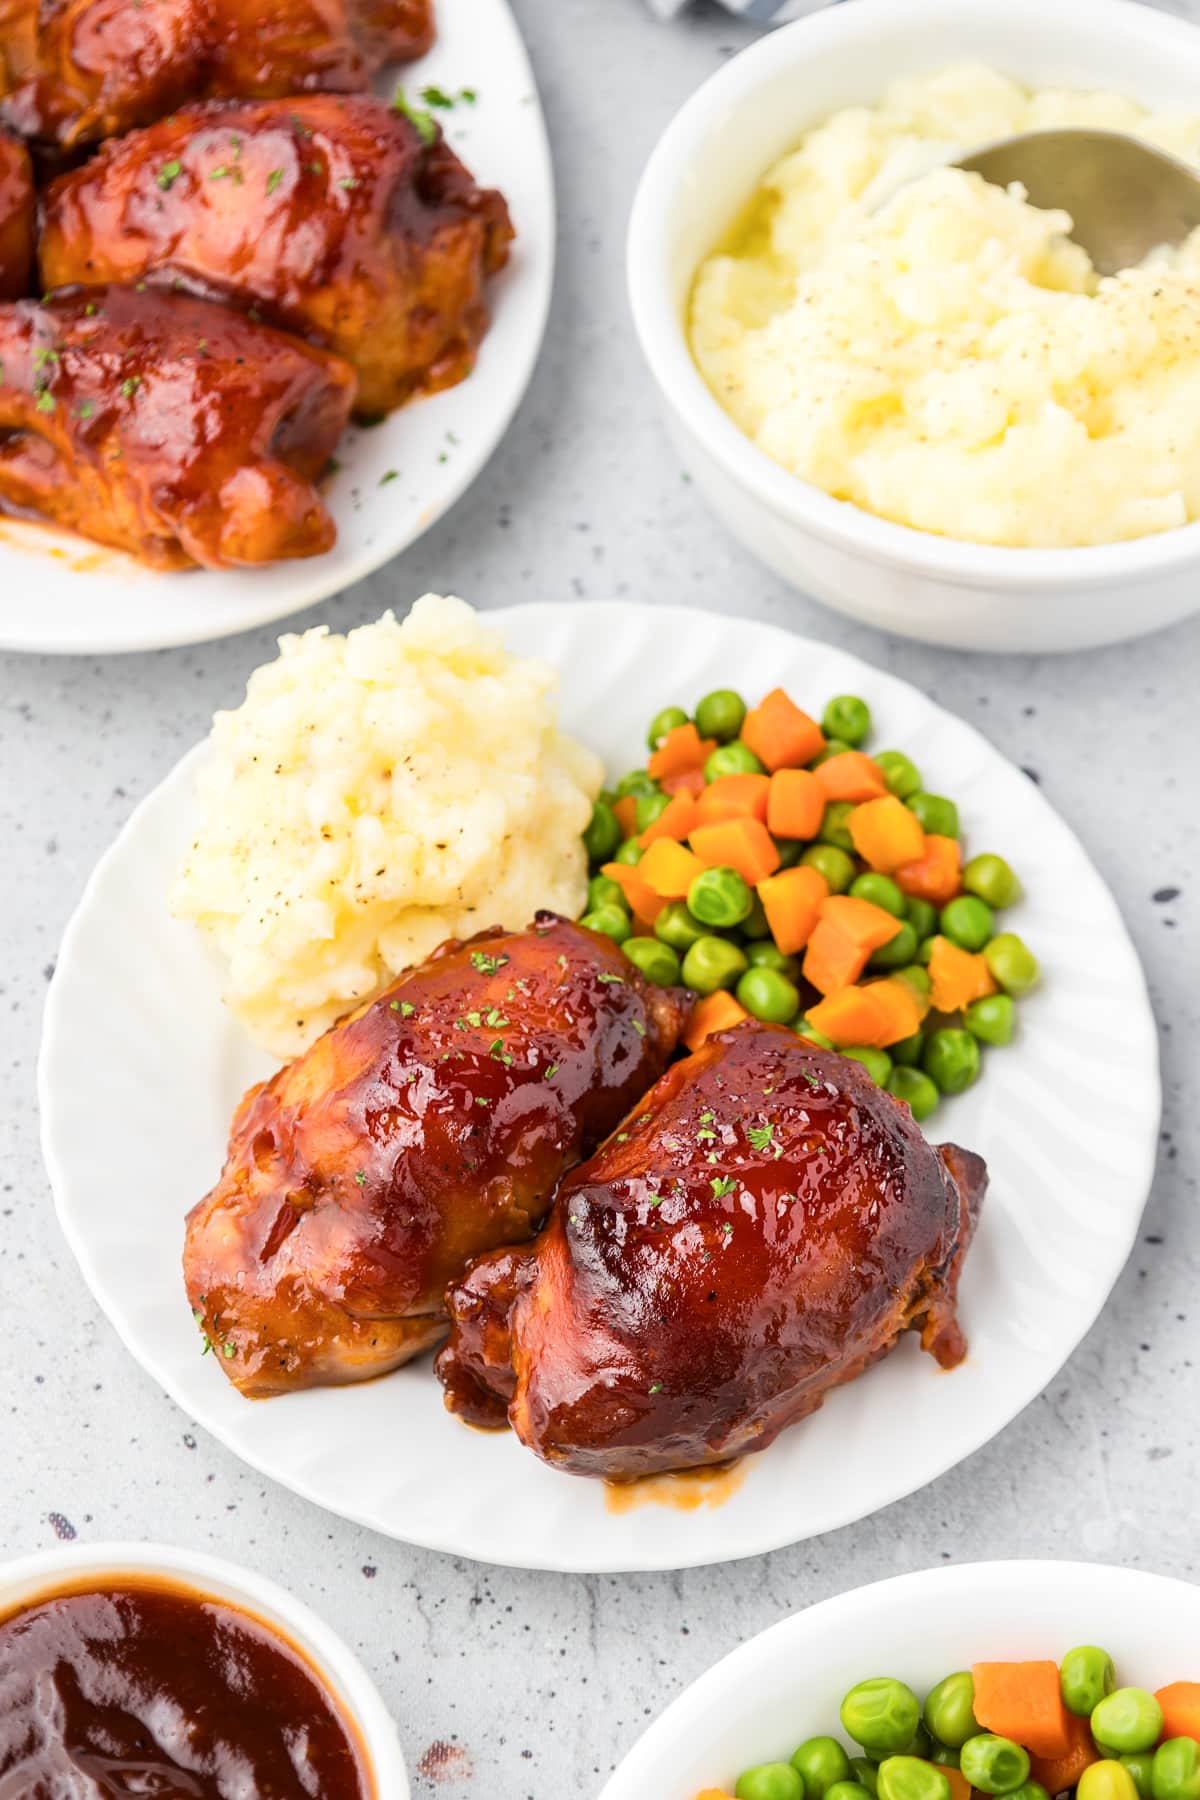 Boneless bbq chicken thighs on a plate with vegetables with other serving dishes full of food nearby on the table.